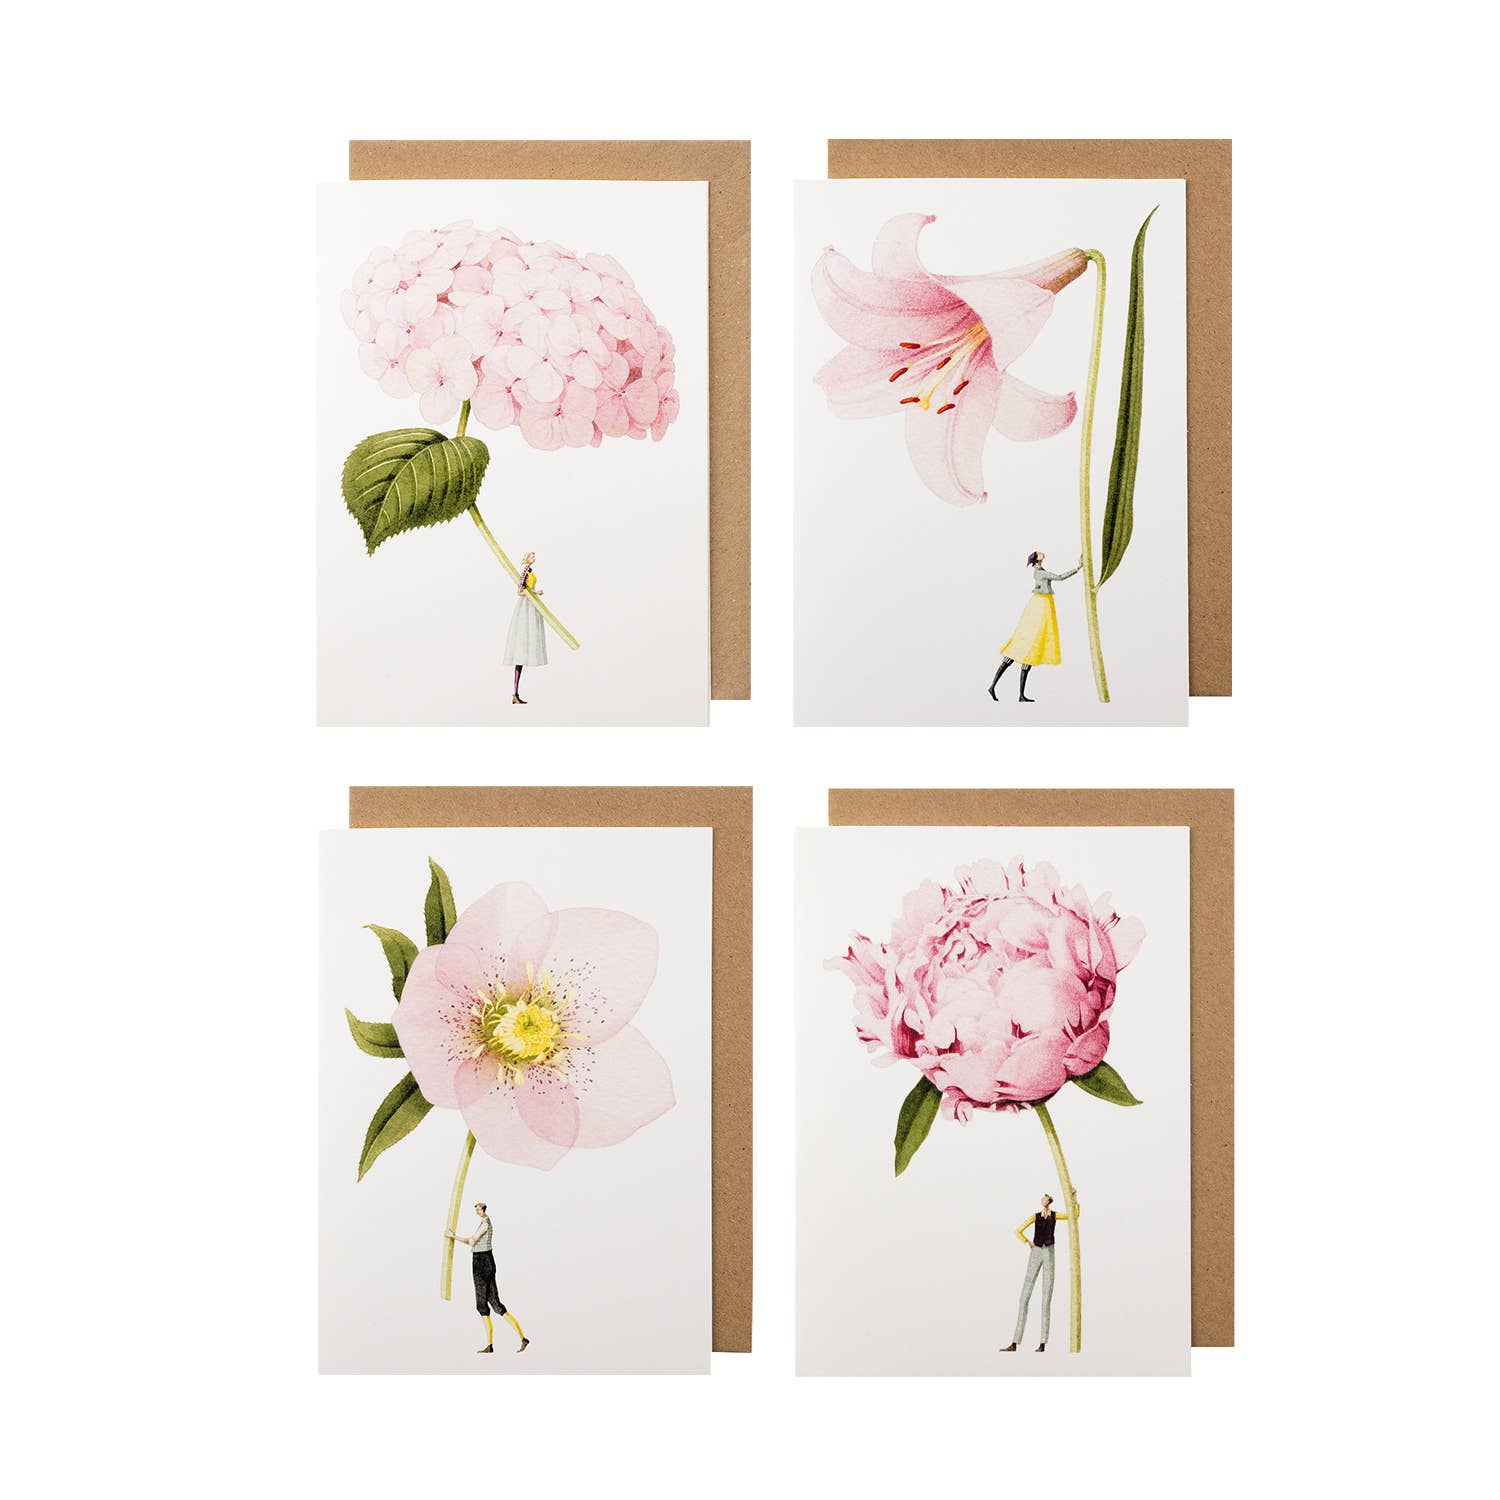 In Bloom - “Pink” 8 Cards Box Set